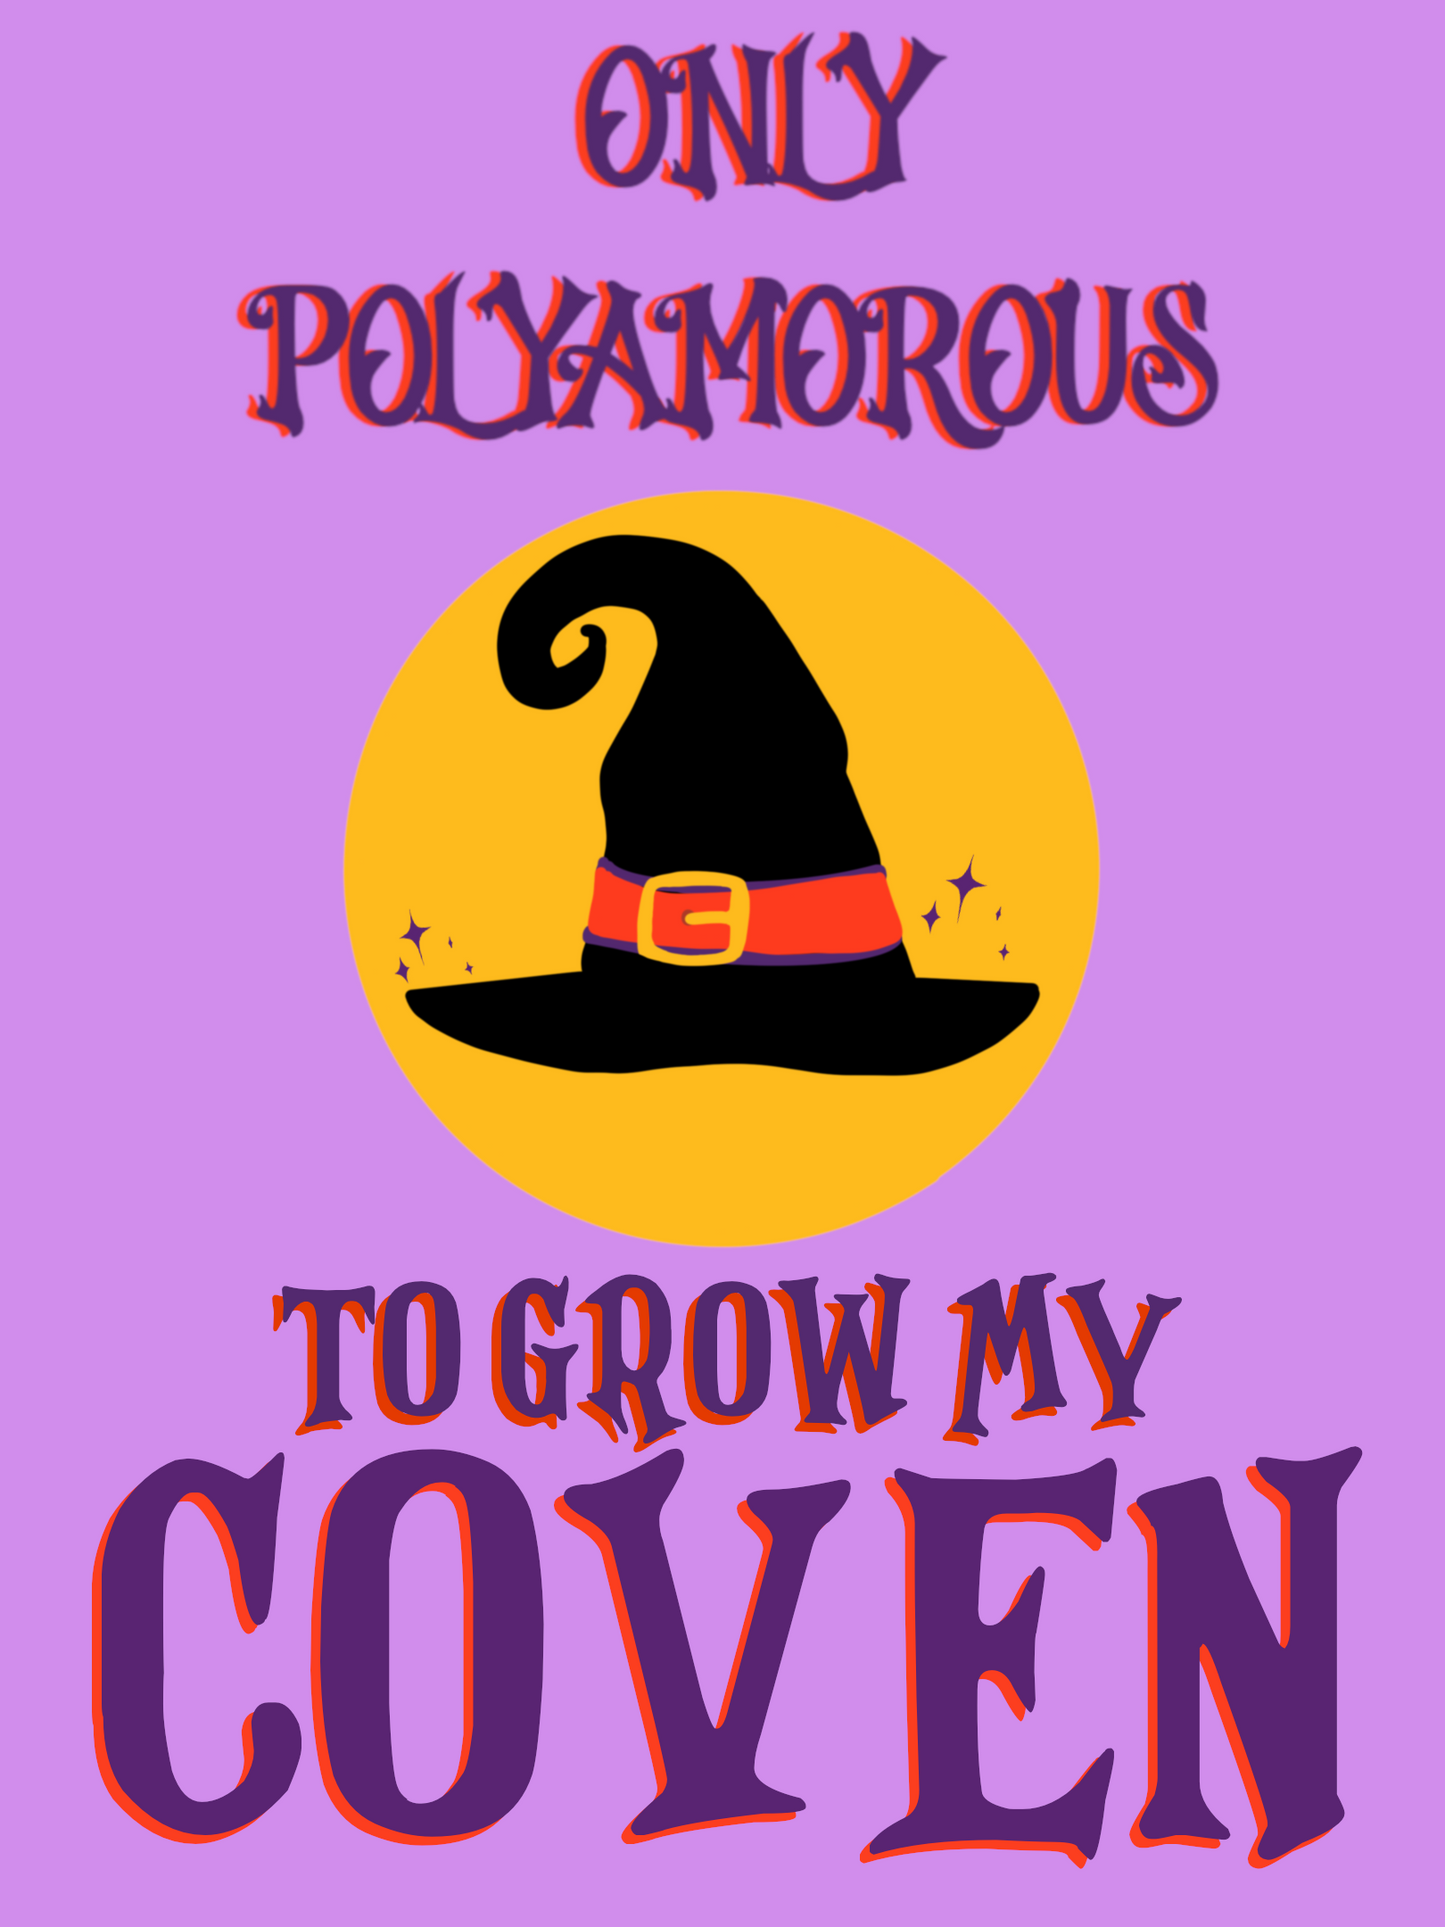 Grow My Coven